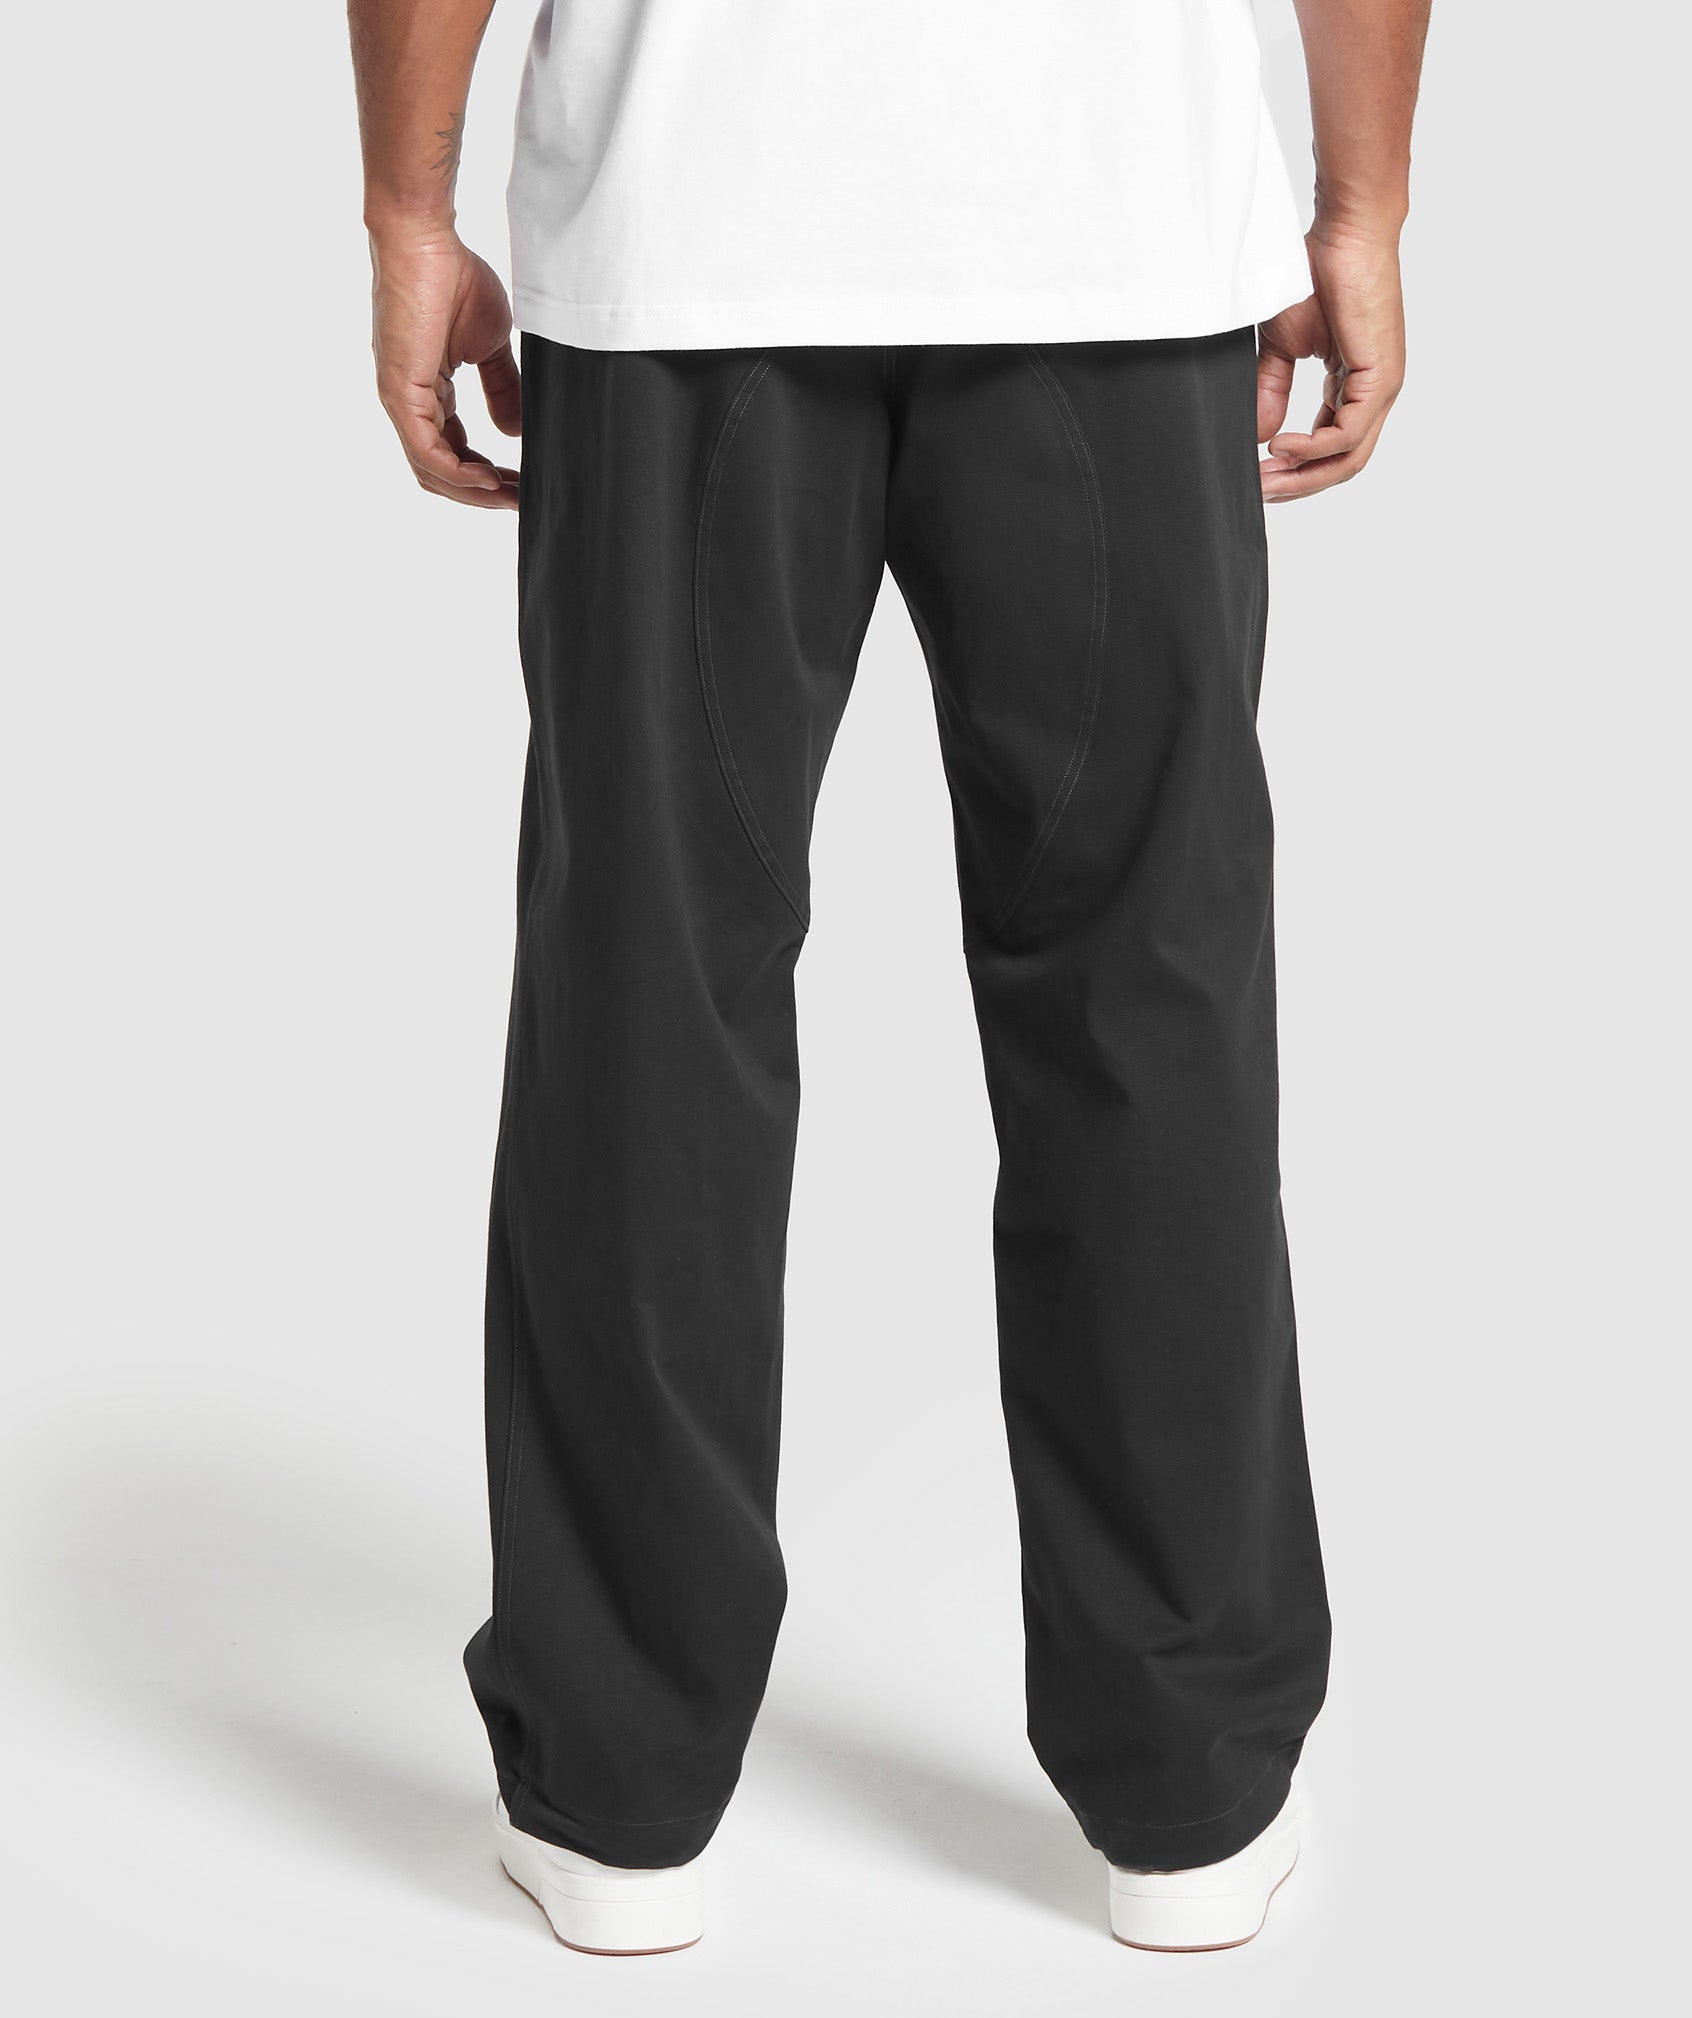 Nike Dri-FIT Academy 23 Woven Track Pants — KitKing